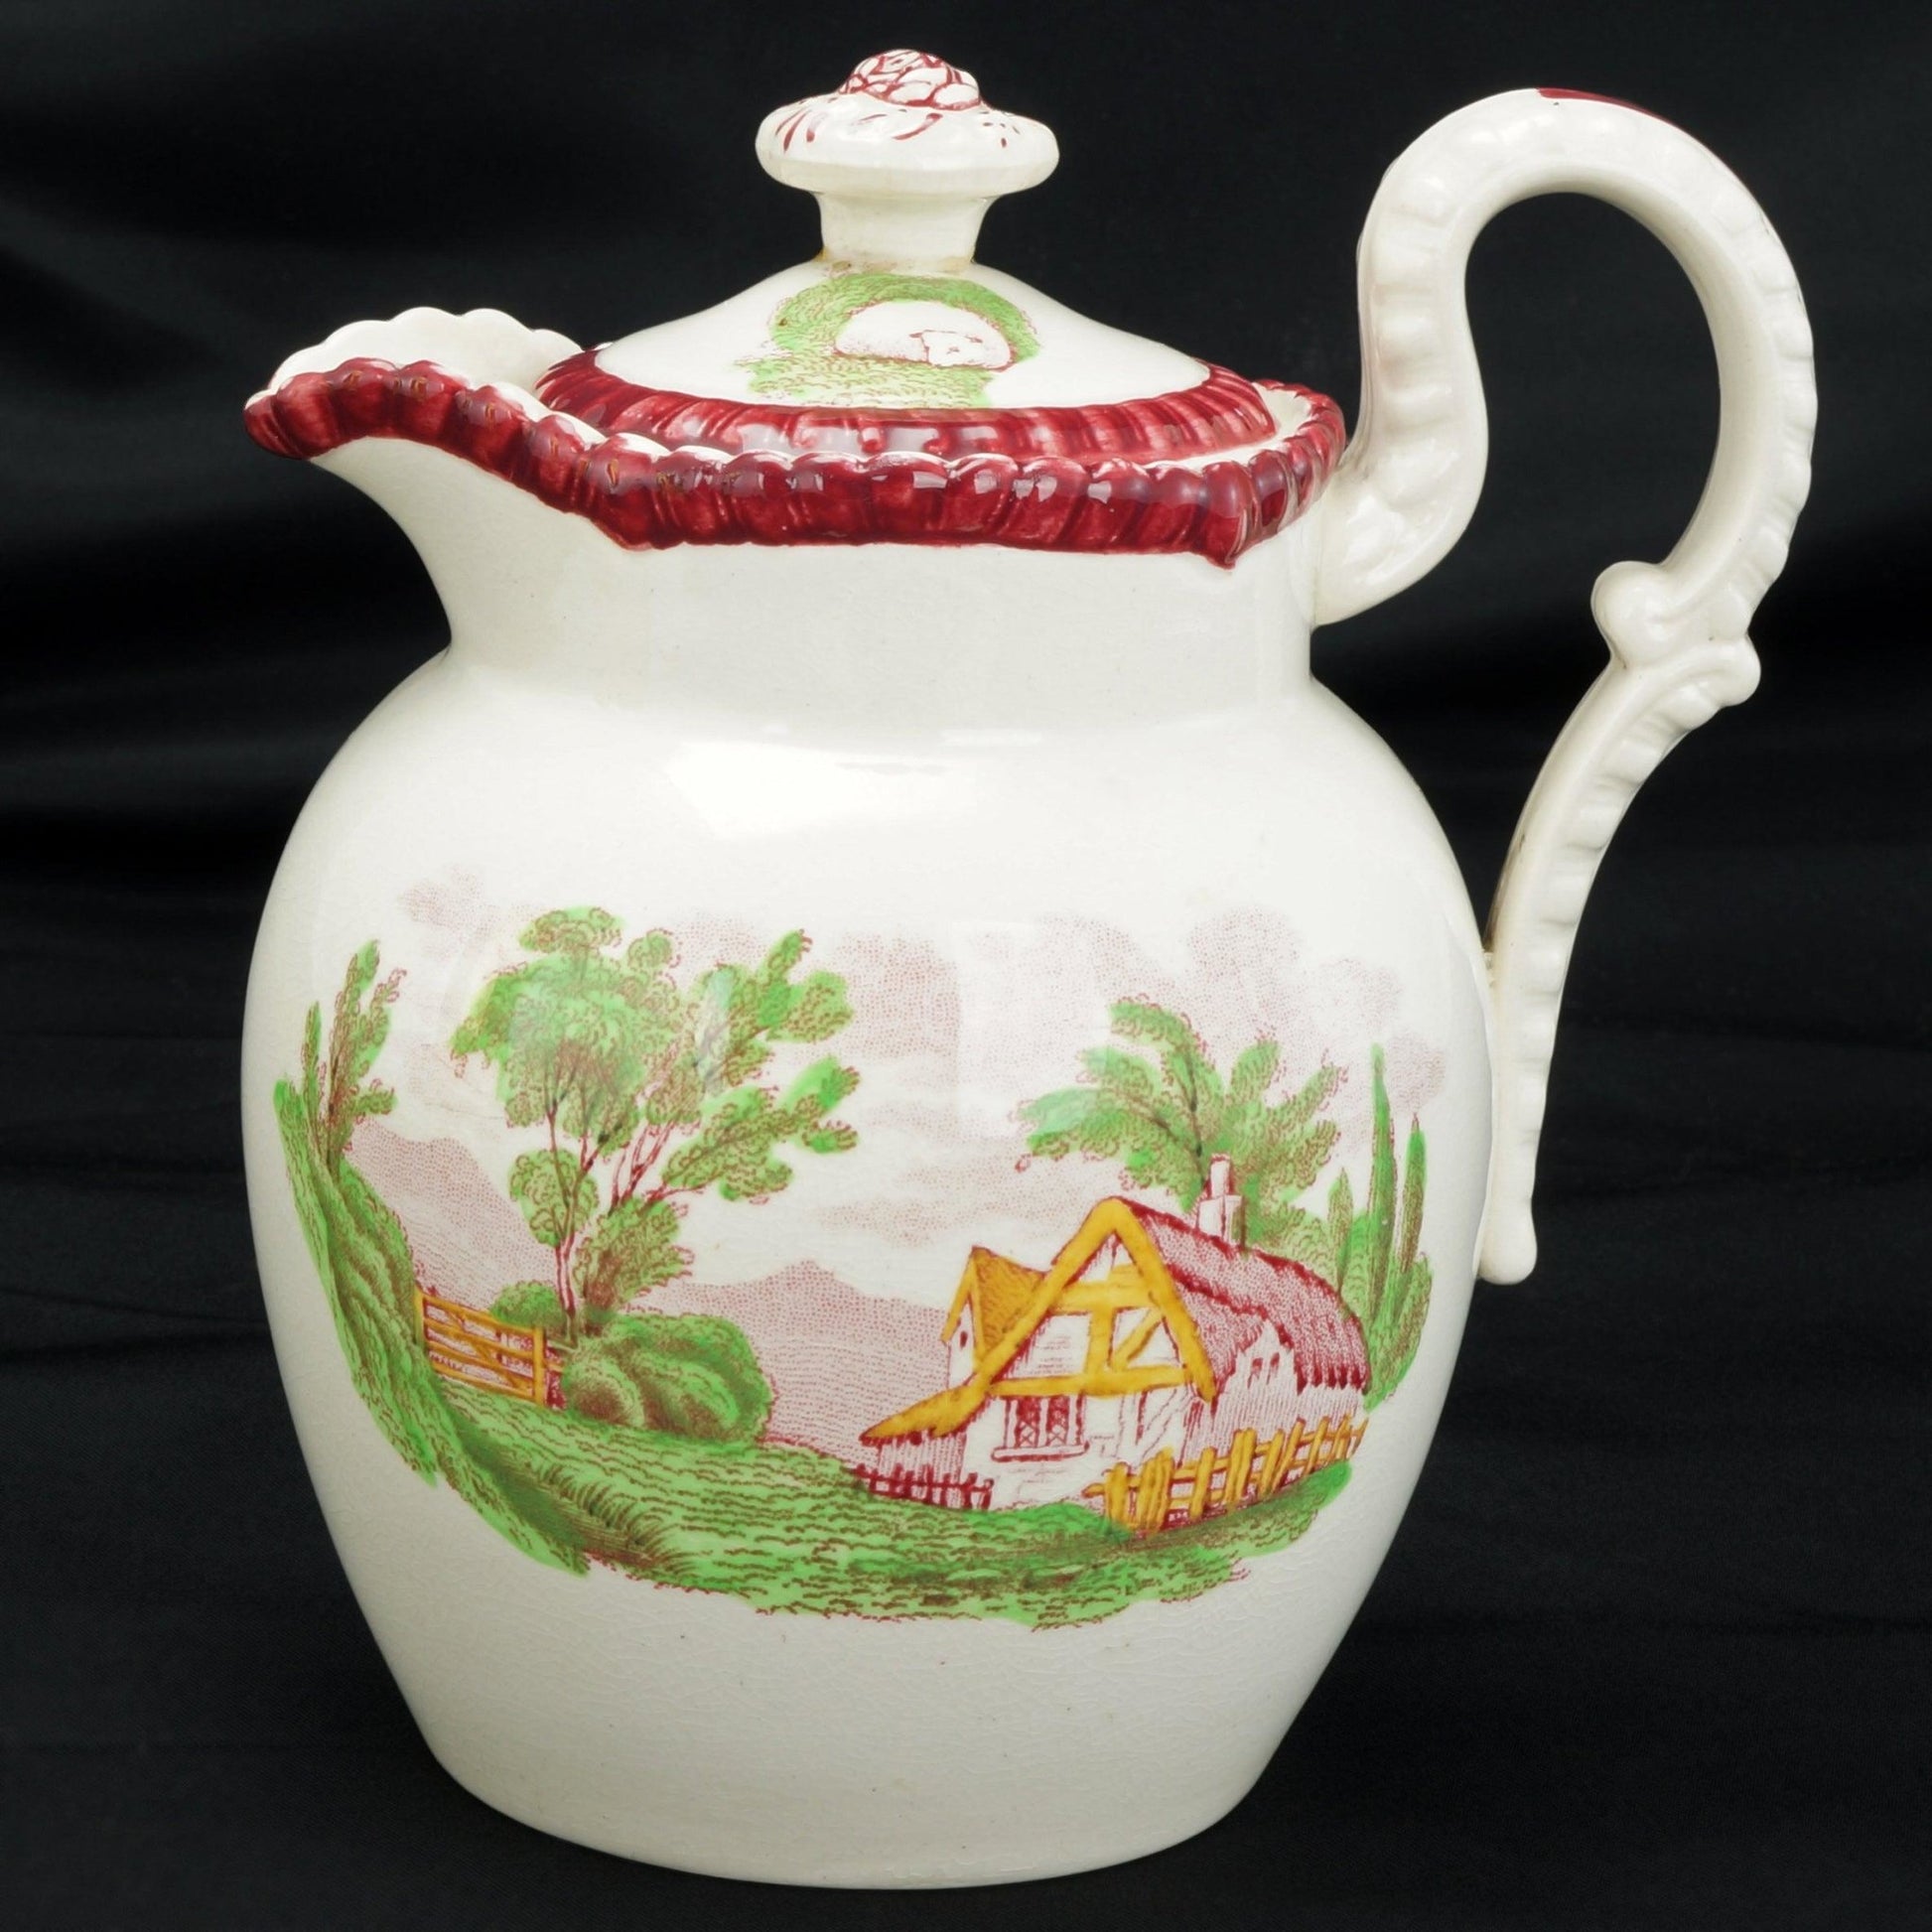 English Spode Copeland Transfer Ware Staffordshire Creamer 19th Century - Bear and Raven Antiques